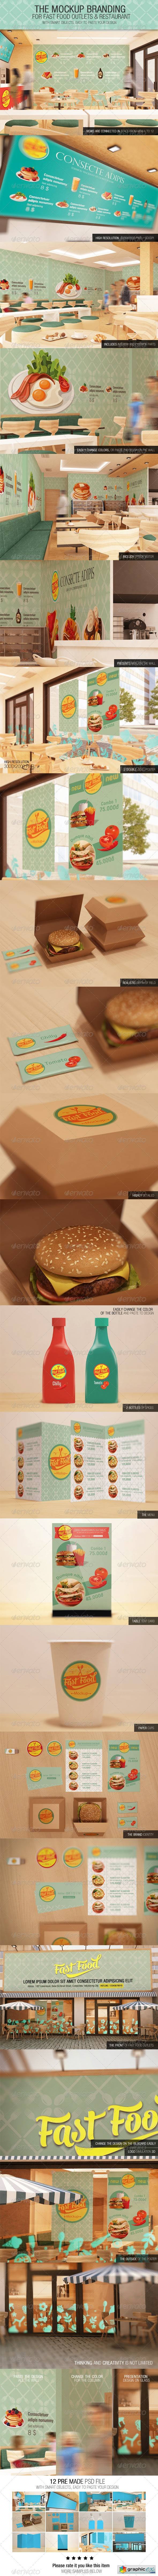 The Mockup Branding For Fast Food Outlets by